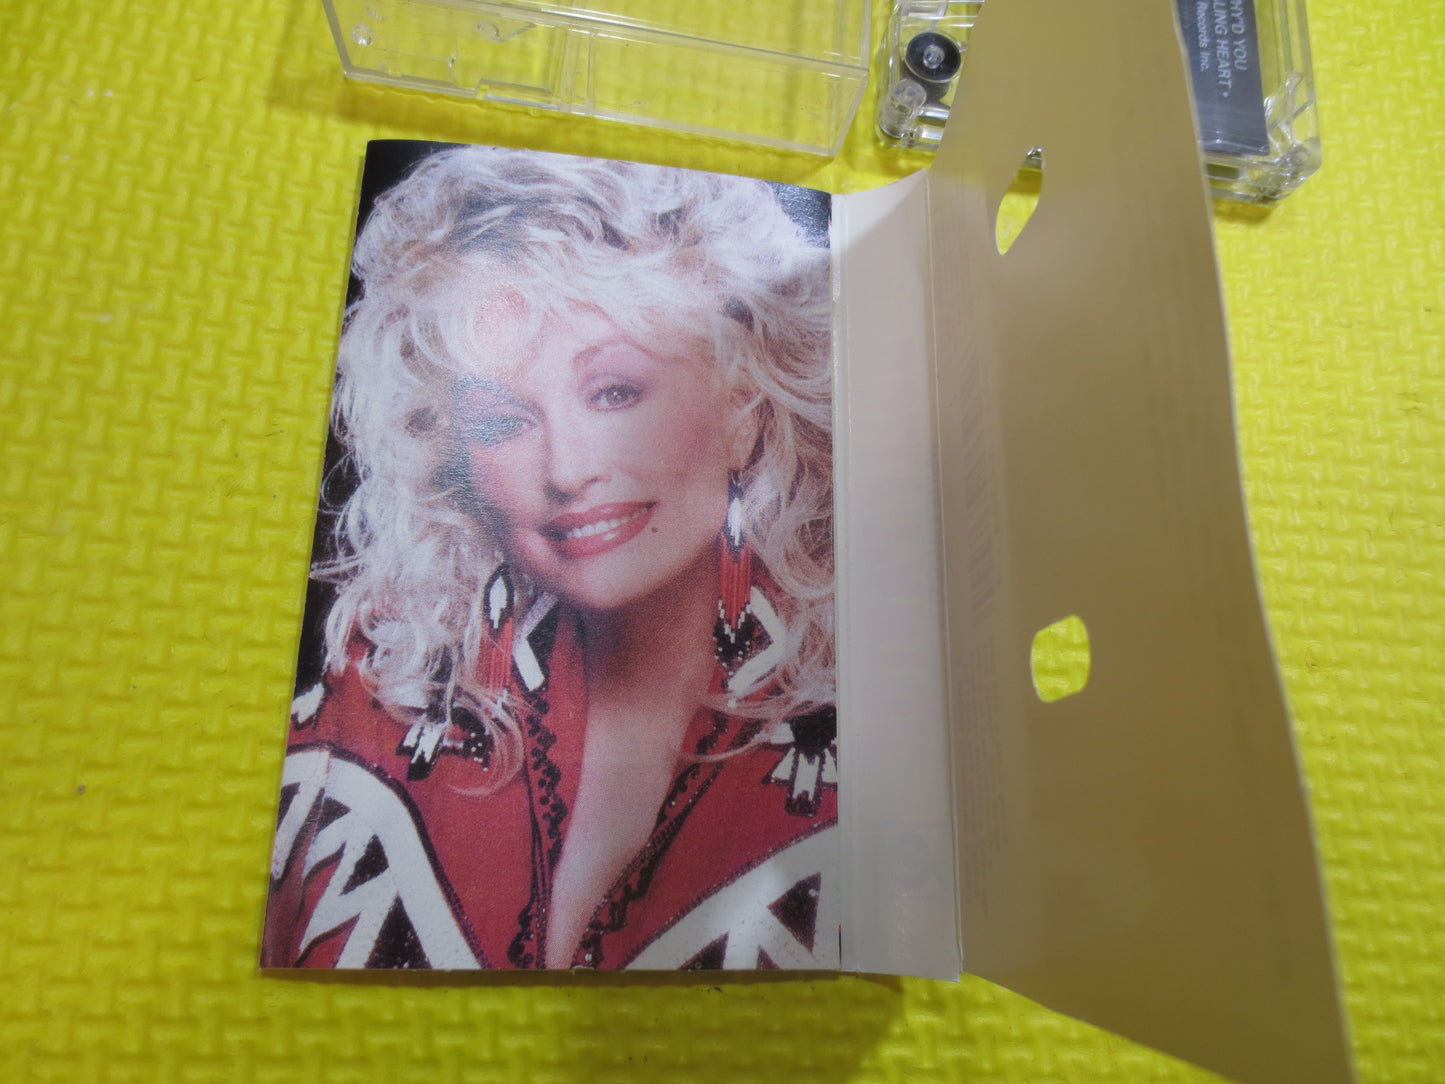 Dolly Parton, Dolly and Porter, Country Tapes, Dolly Albums, Dolly Parton Music, Cassette Tapes, Tapes, 1989 Cassette